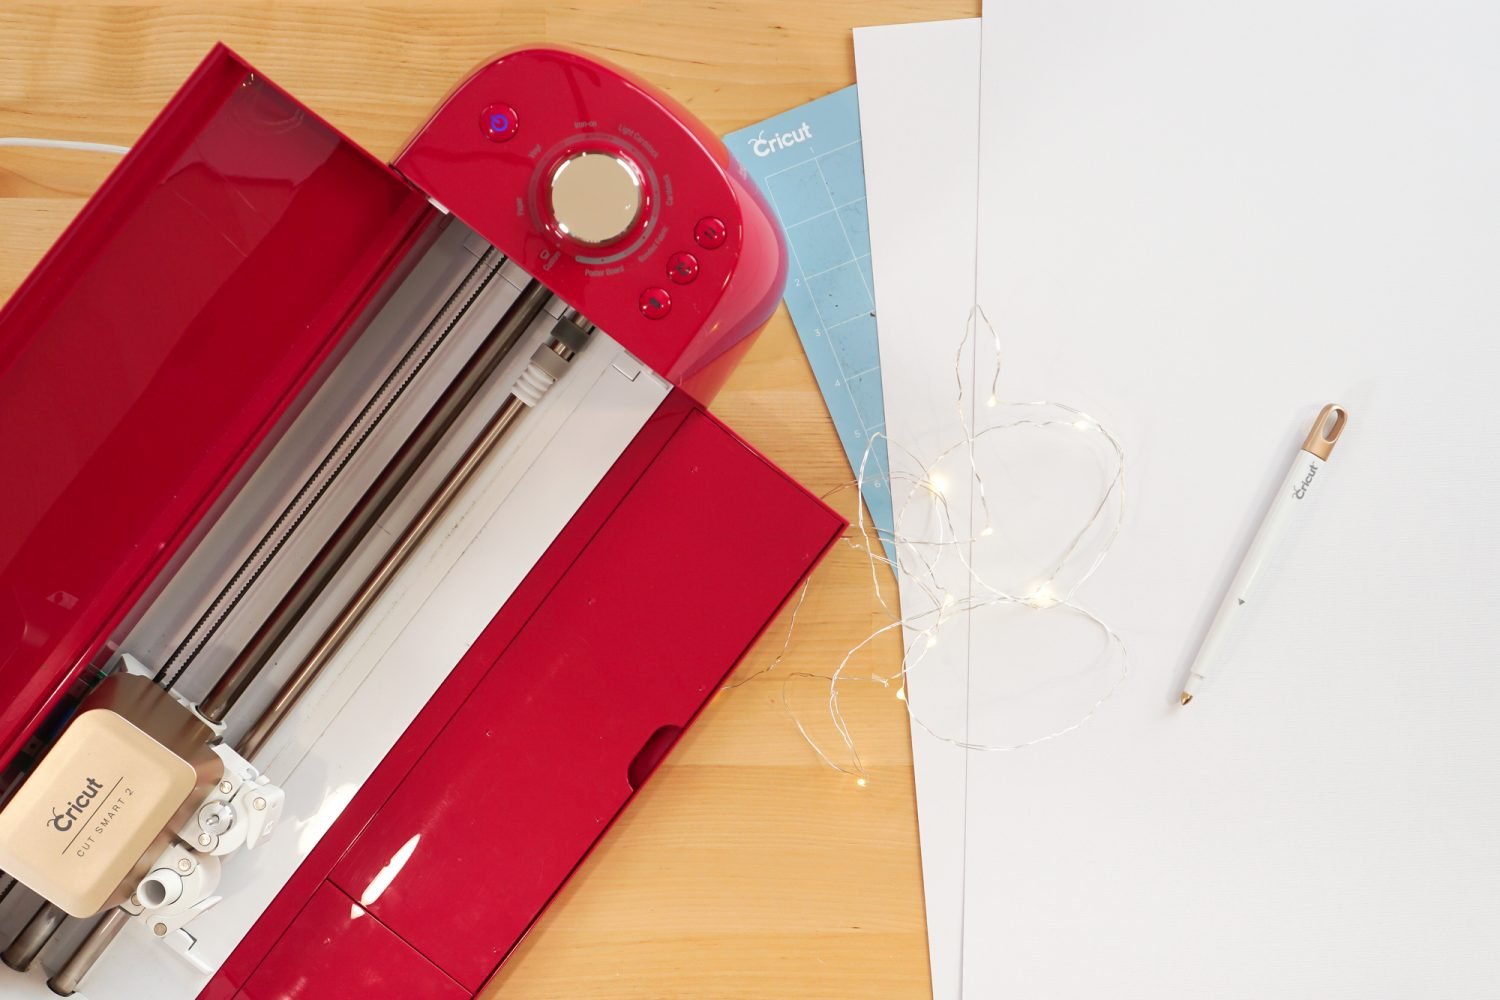 Supplies needed for this project: Cricut Explore, 12" x 24" cutting mat, 12" x 24" white cardstock, scoring stylus, fairy lights